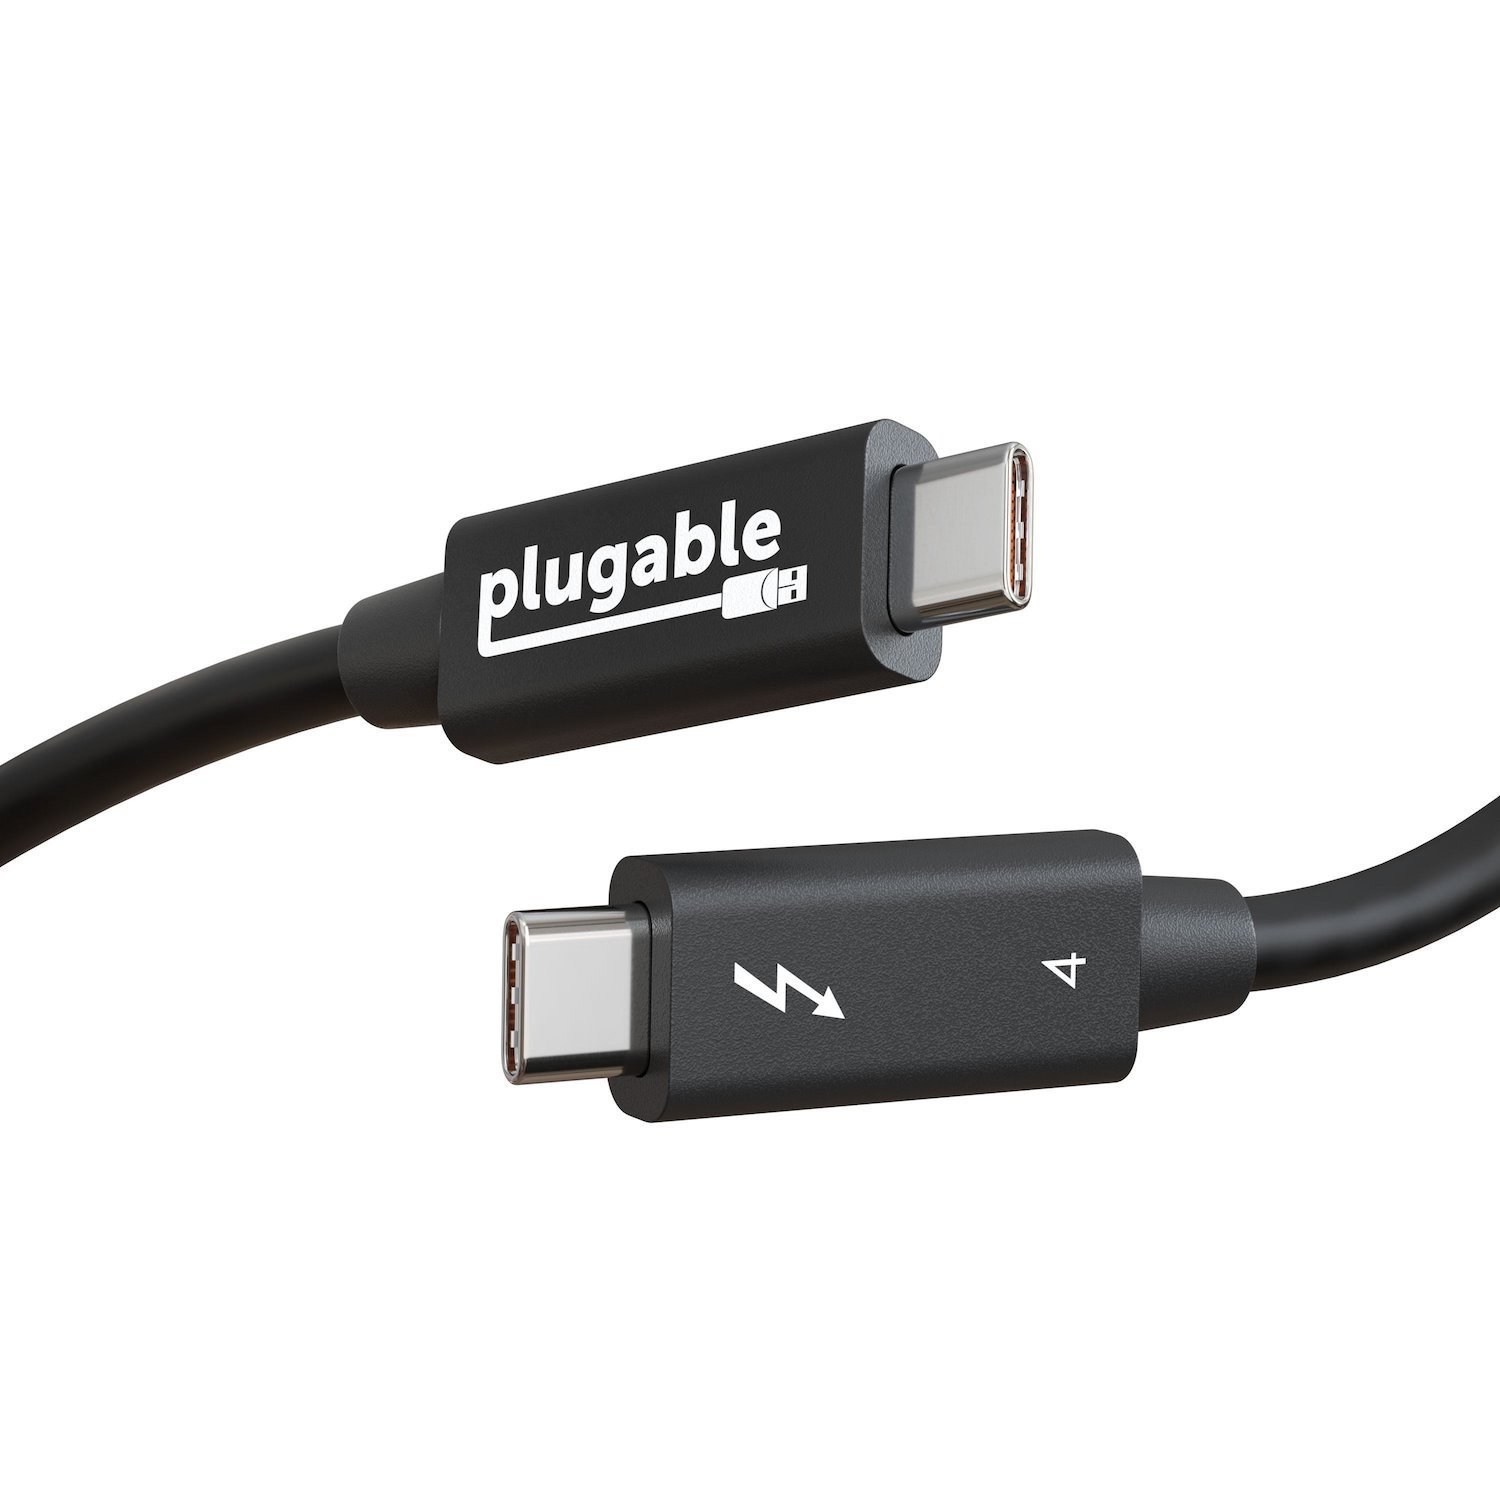 Plugable Technologies Thunderbolt 4 Cable 2M/6.6ft 100W Single 8K/Dual 4K Displays 40Gbps Transfer (Plugable TBT4 Cable 2M 100W 40Gbps)